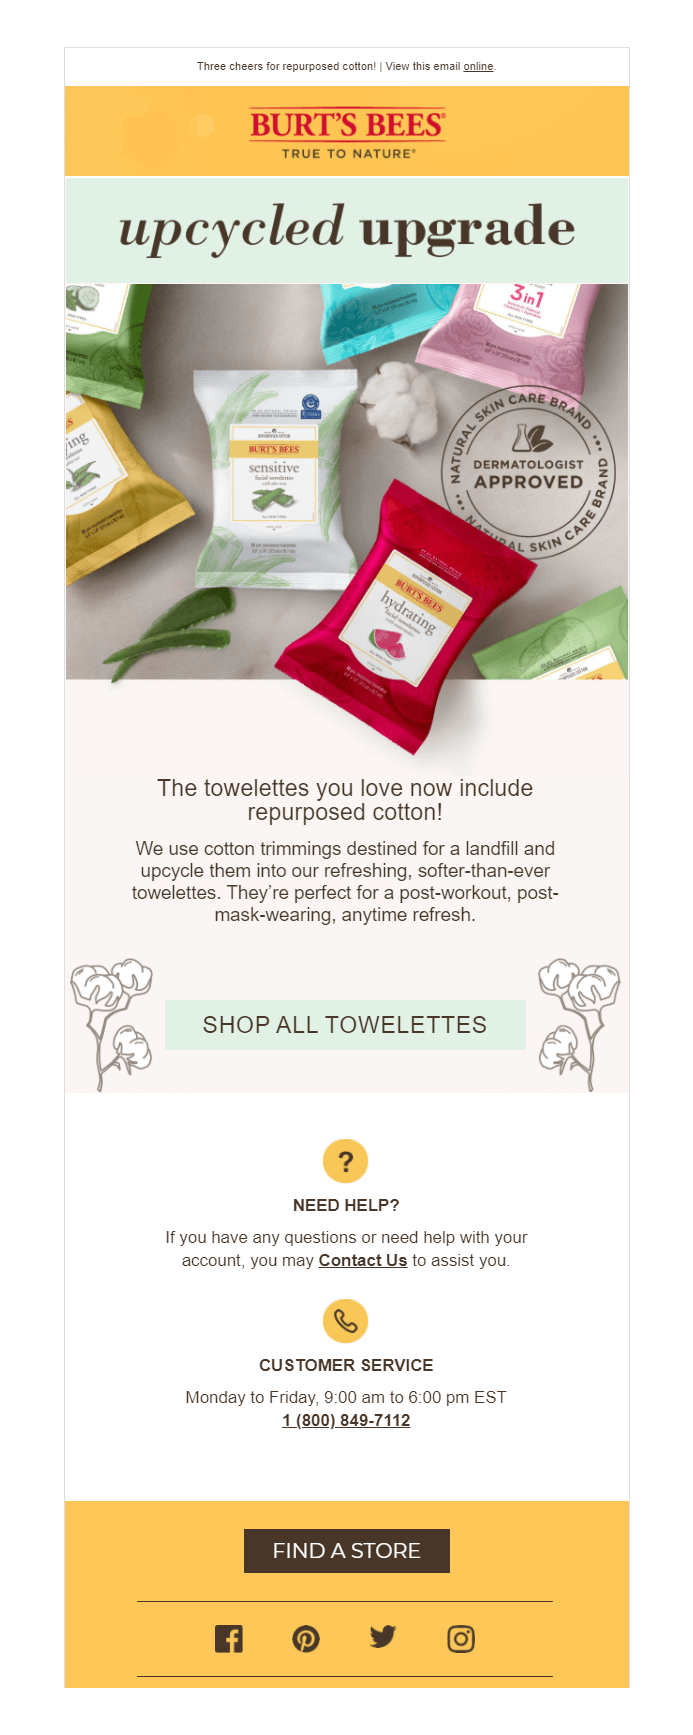 Burt's Bees branded email marketing campaign